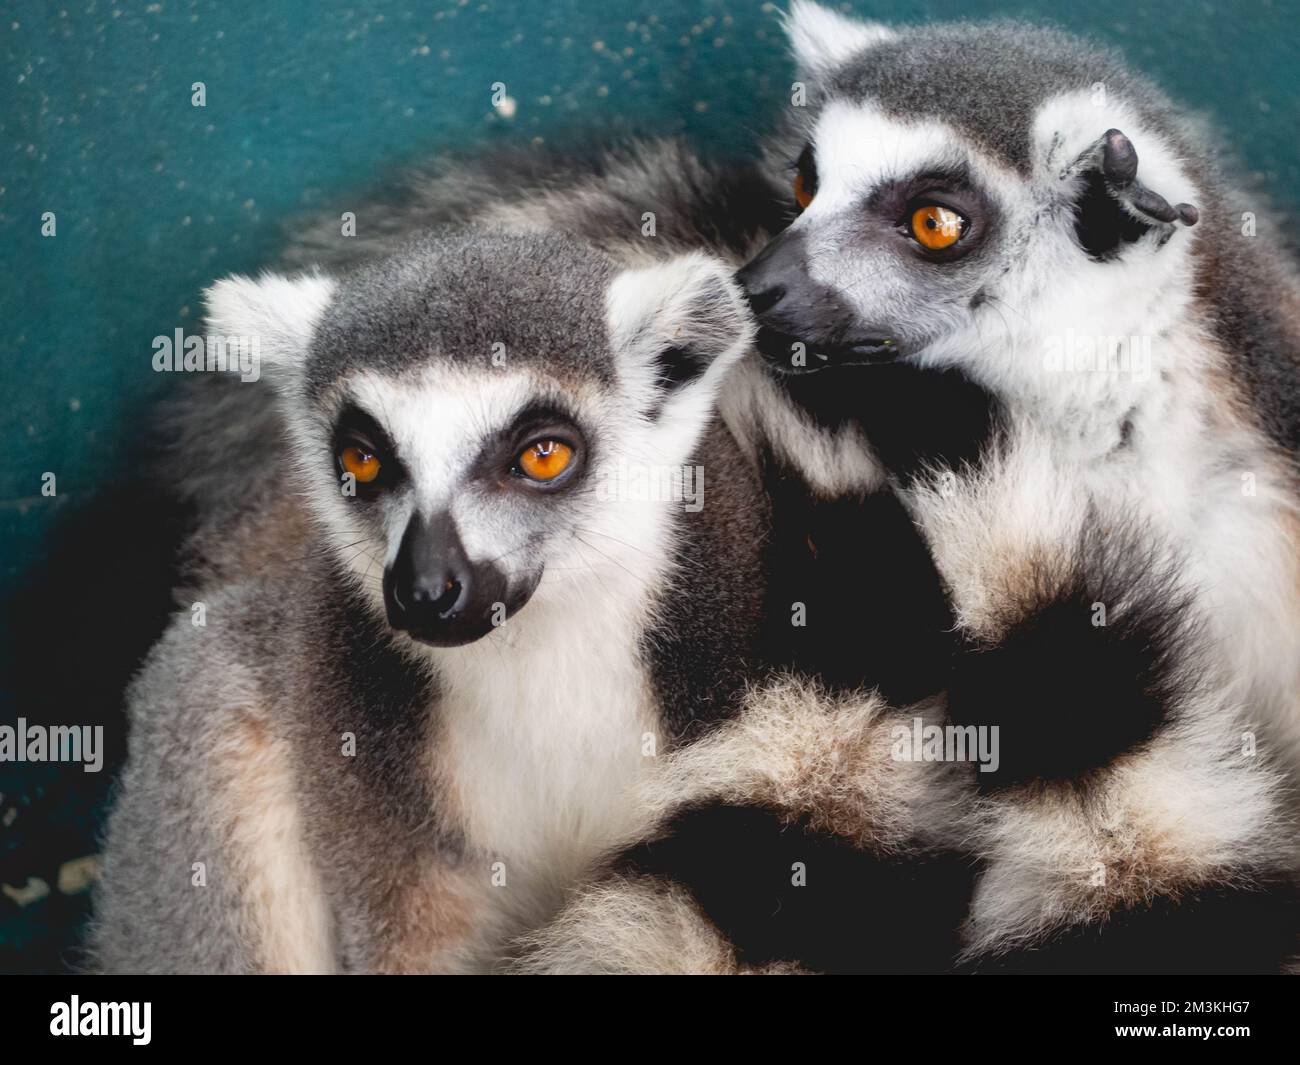 Two lemurs that are close together Stock Photo